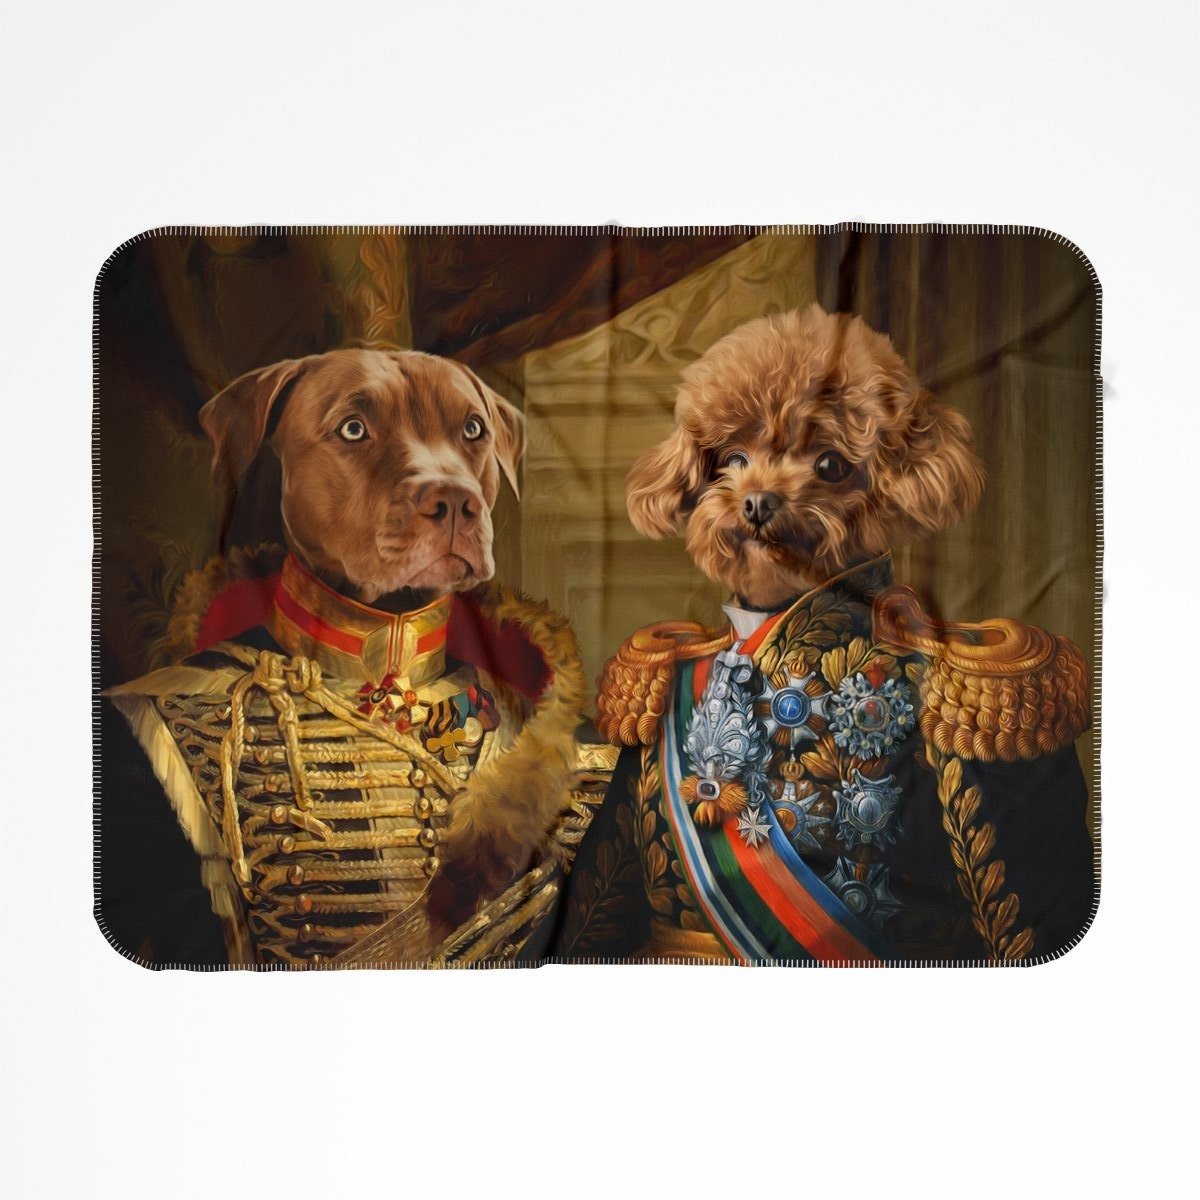 The Brothers In Arms: Custom Pet Blanket - Paw & Glory - #pet portraits# - #dog portraits# - #pet portraits uk#Paw and glory, Pet portraits blanket,custom puppy blankets, blanket with your dog on it, custom dog face blanket, blanket of dog, dog personalized blanket